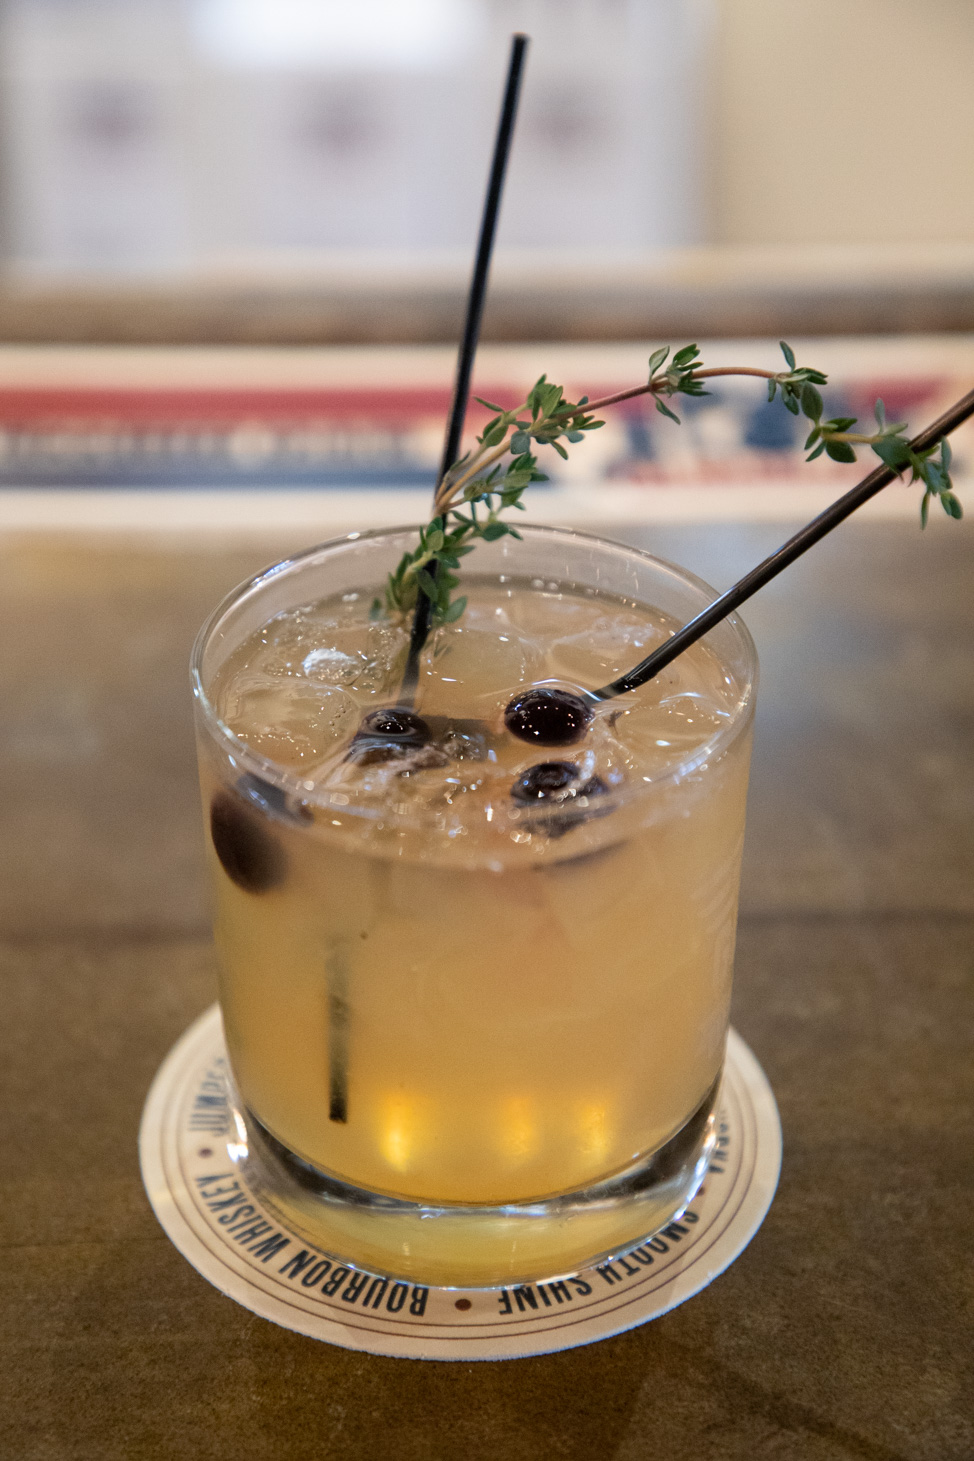 Cocktails in Clarksville: A Perfect Day in Tennessee at Old Glory Distilling Co.